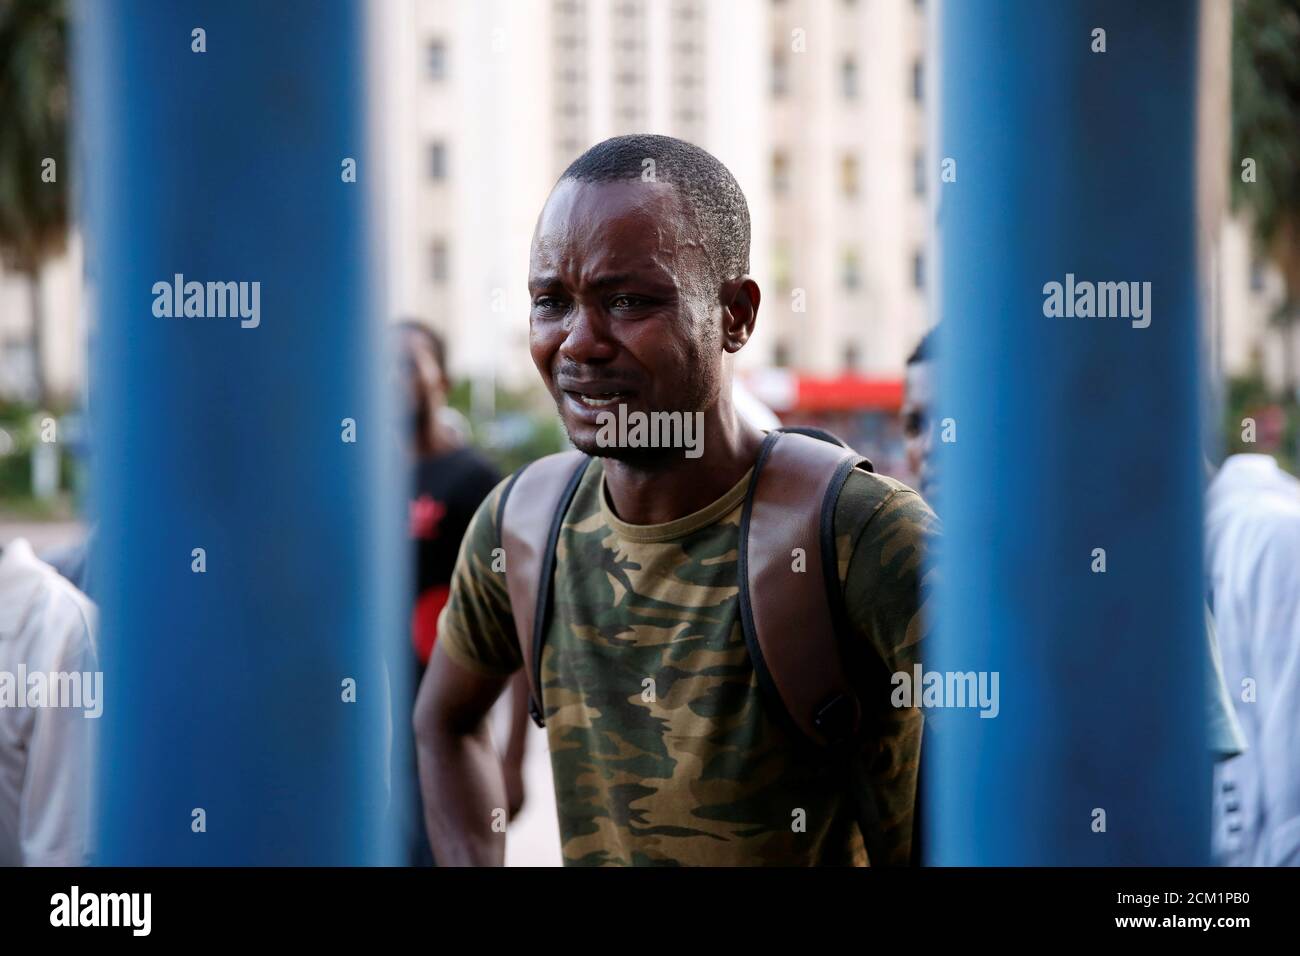 A man reacts after hearing the announcement by Congo's election board to postpone a presidential vote scheduled for Sunday by one week, outside the the Congo's National Independent Electoral Commission (CENI) building in Kinshasa, Democratic Republic of Congo, December 20, 2018. REUTERS/Baz Ratner Stock Photo